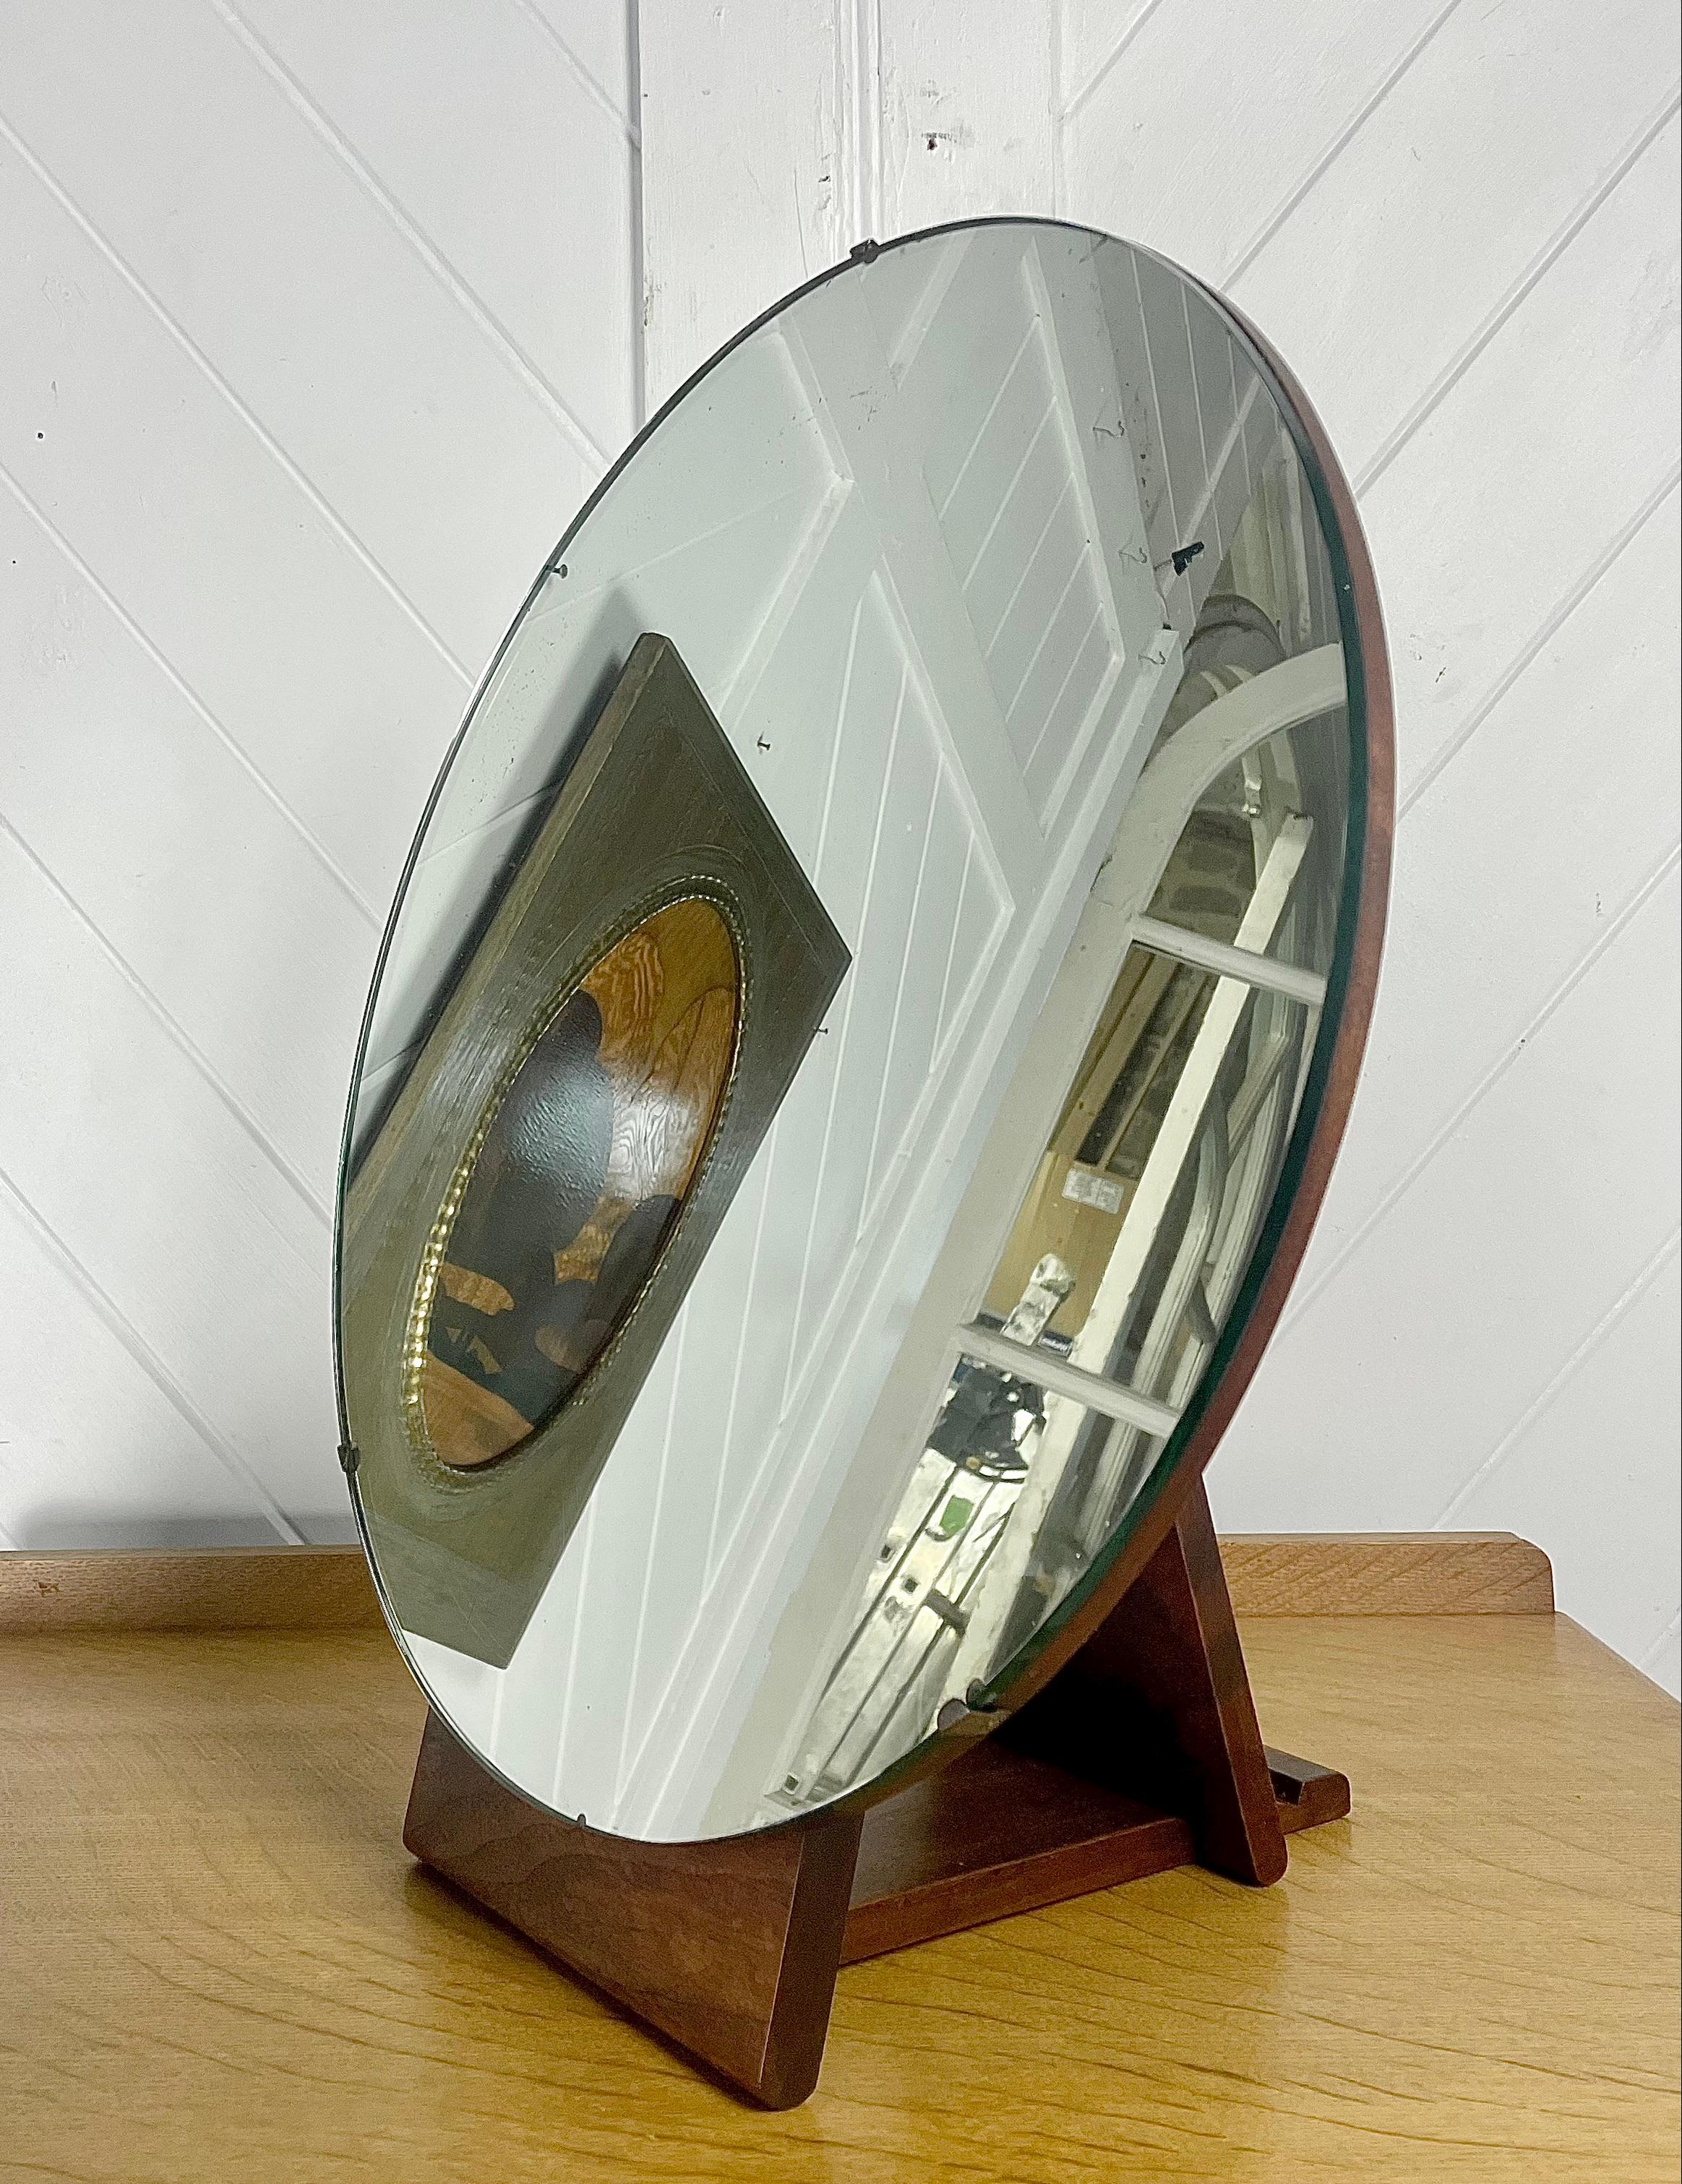 Super stylish ‘Modernist' Walnut and Glass adjustable table top mirror.
Designed by Dick Russell for Gordon Russell
Circa 1930

Richard (Dick) Russell, Gordon’s younger brother worked closely with the modernist designer Marian Pepler his wife, both